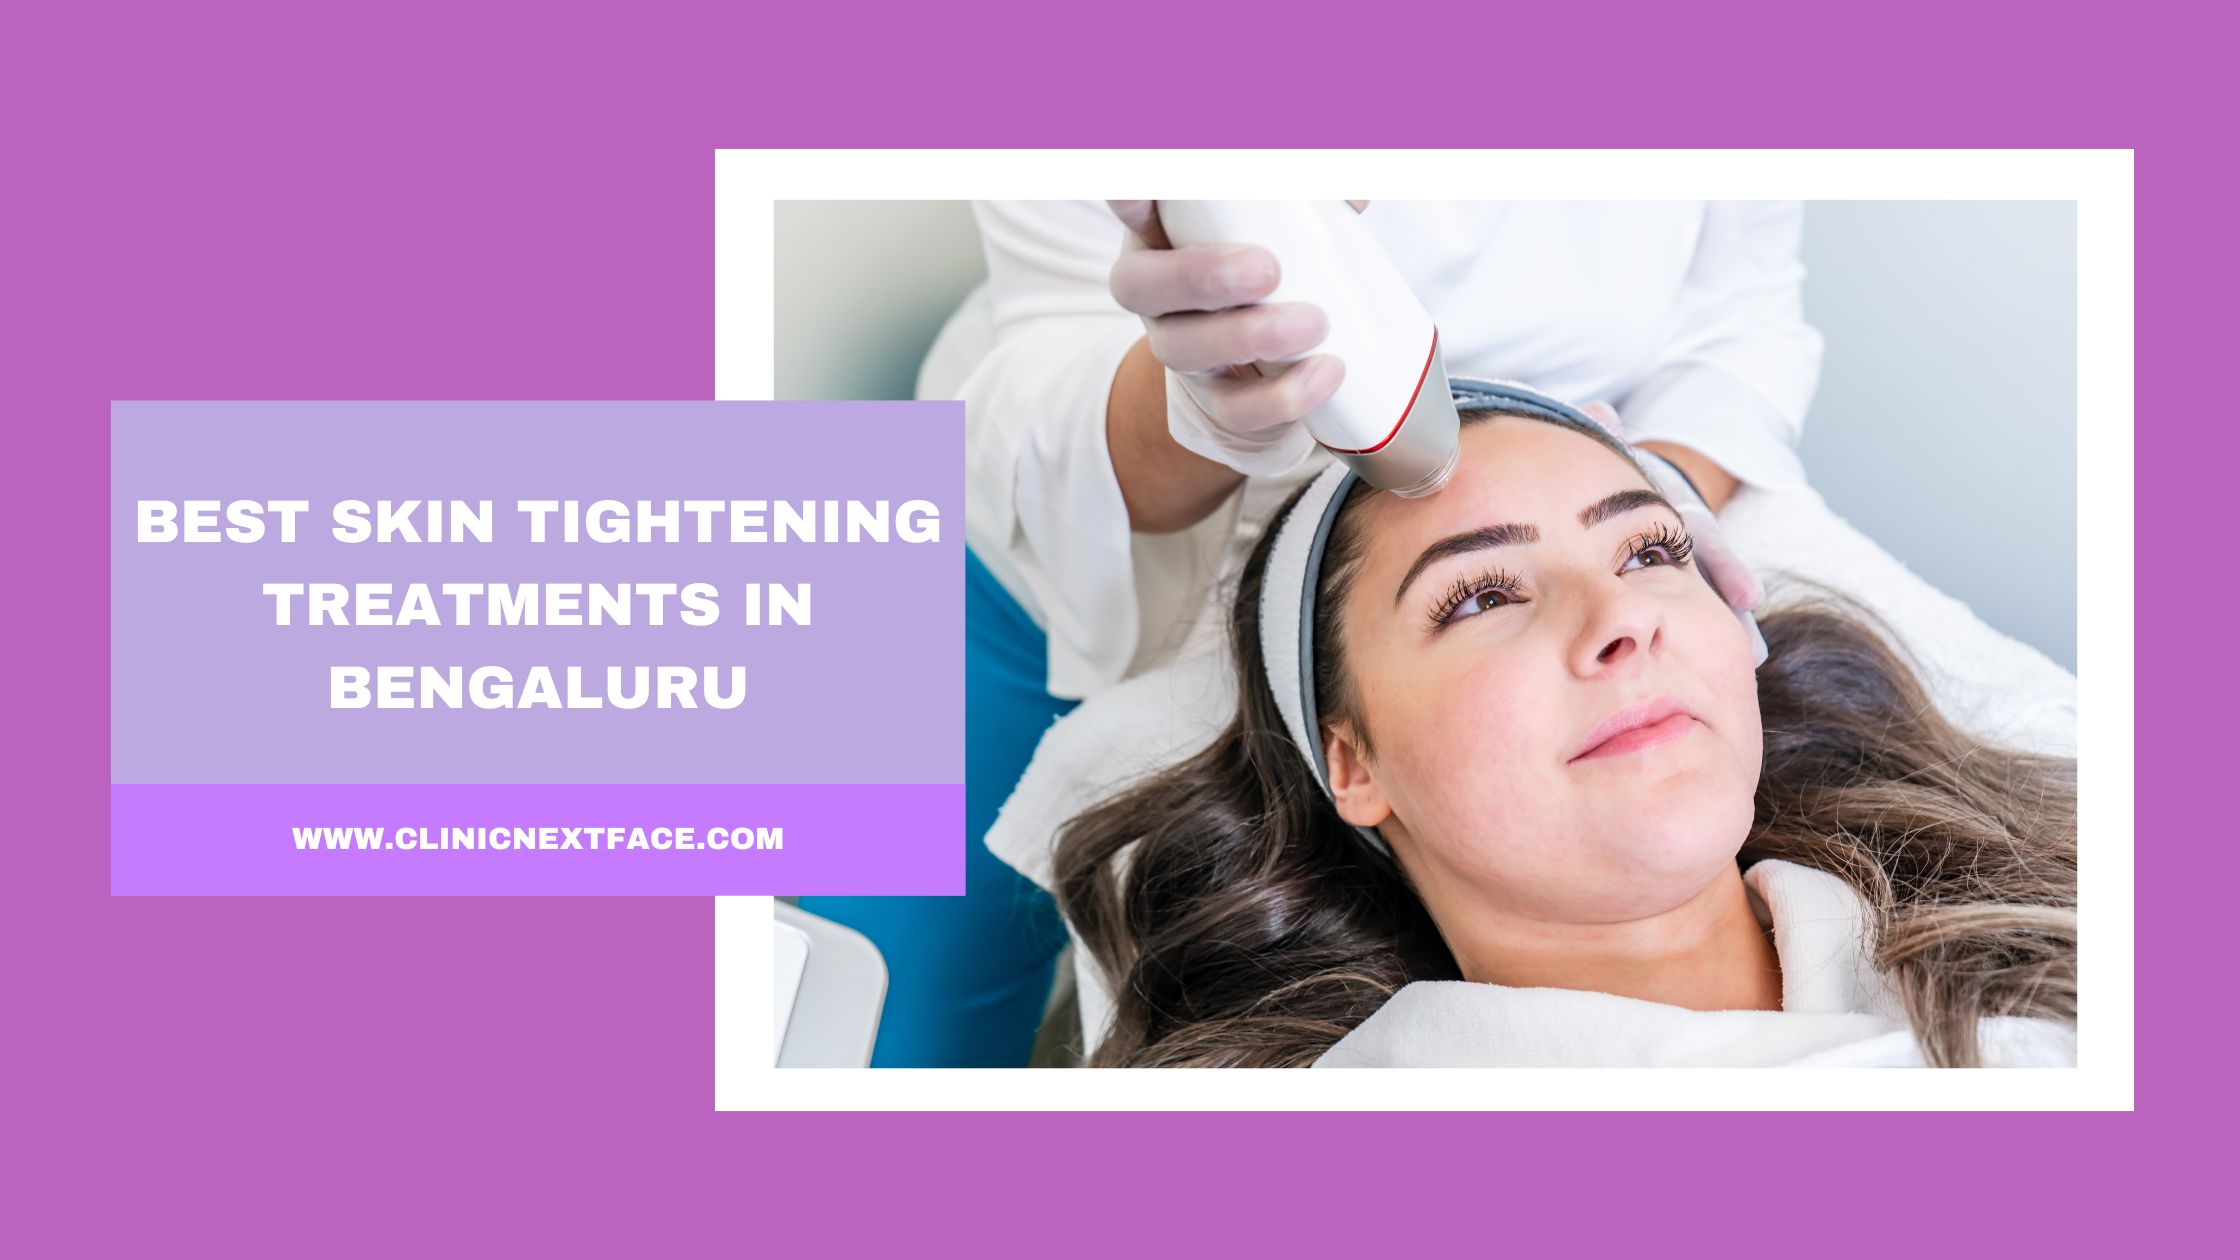 Why Skin Tightening Facials Don't Work? - Clinic Next Face